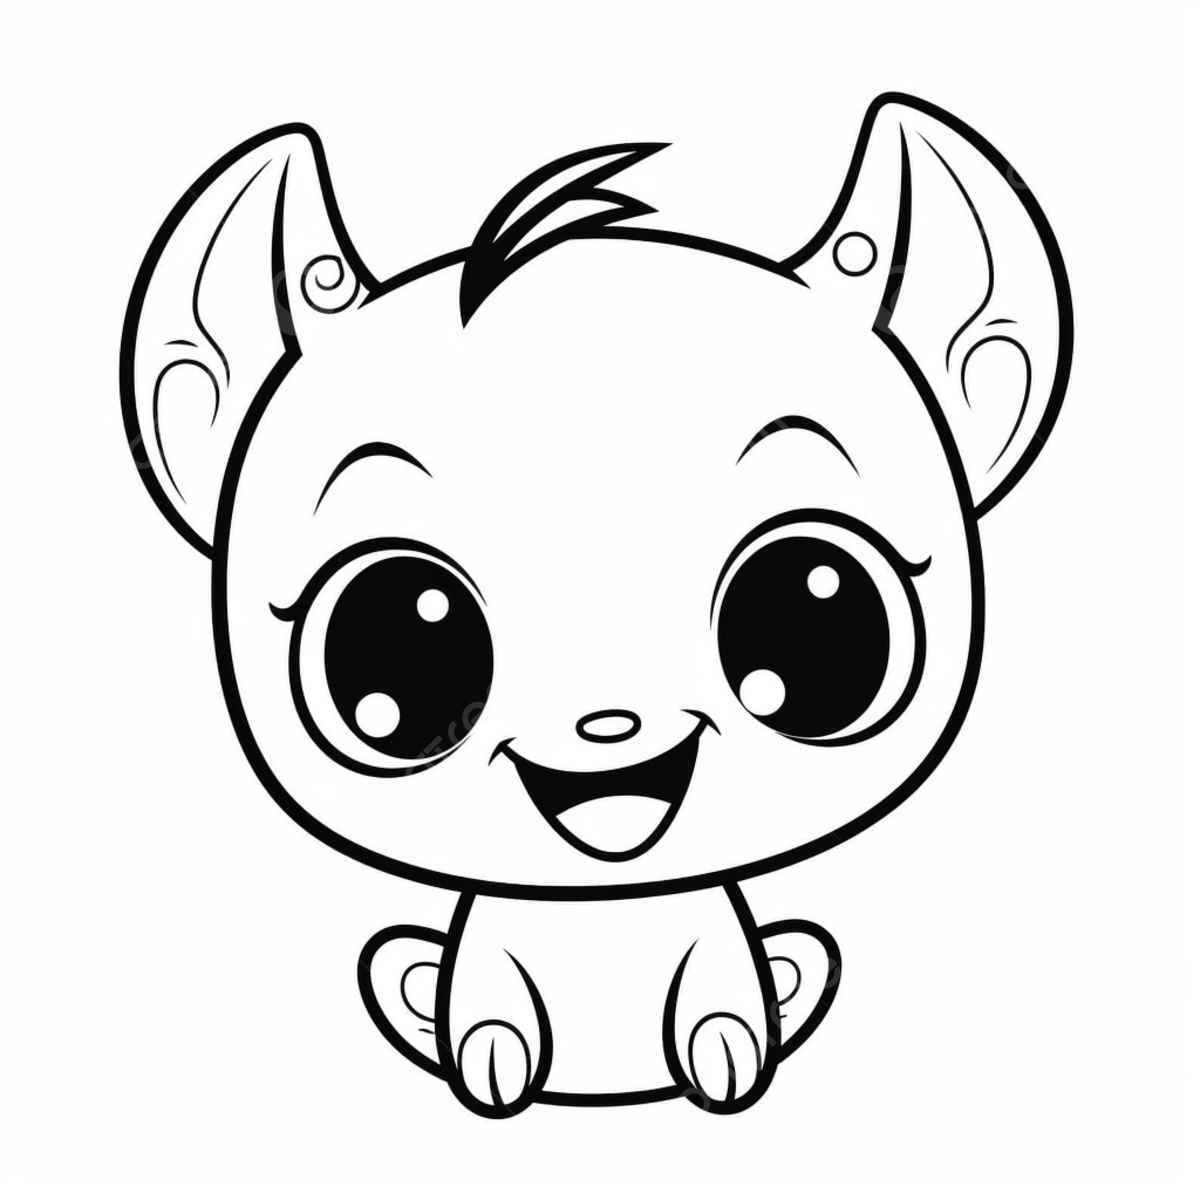 Cute small dog coloring pages dog drawing ring drawing mall drawing png transparent image and clipart for free download